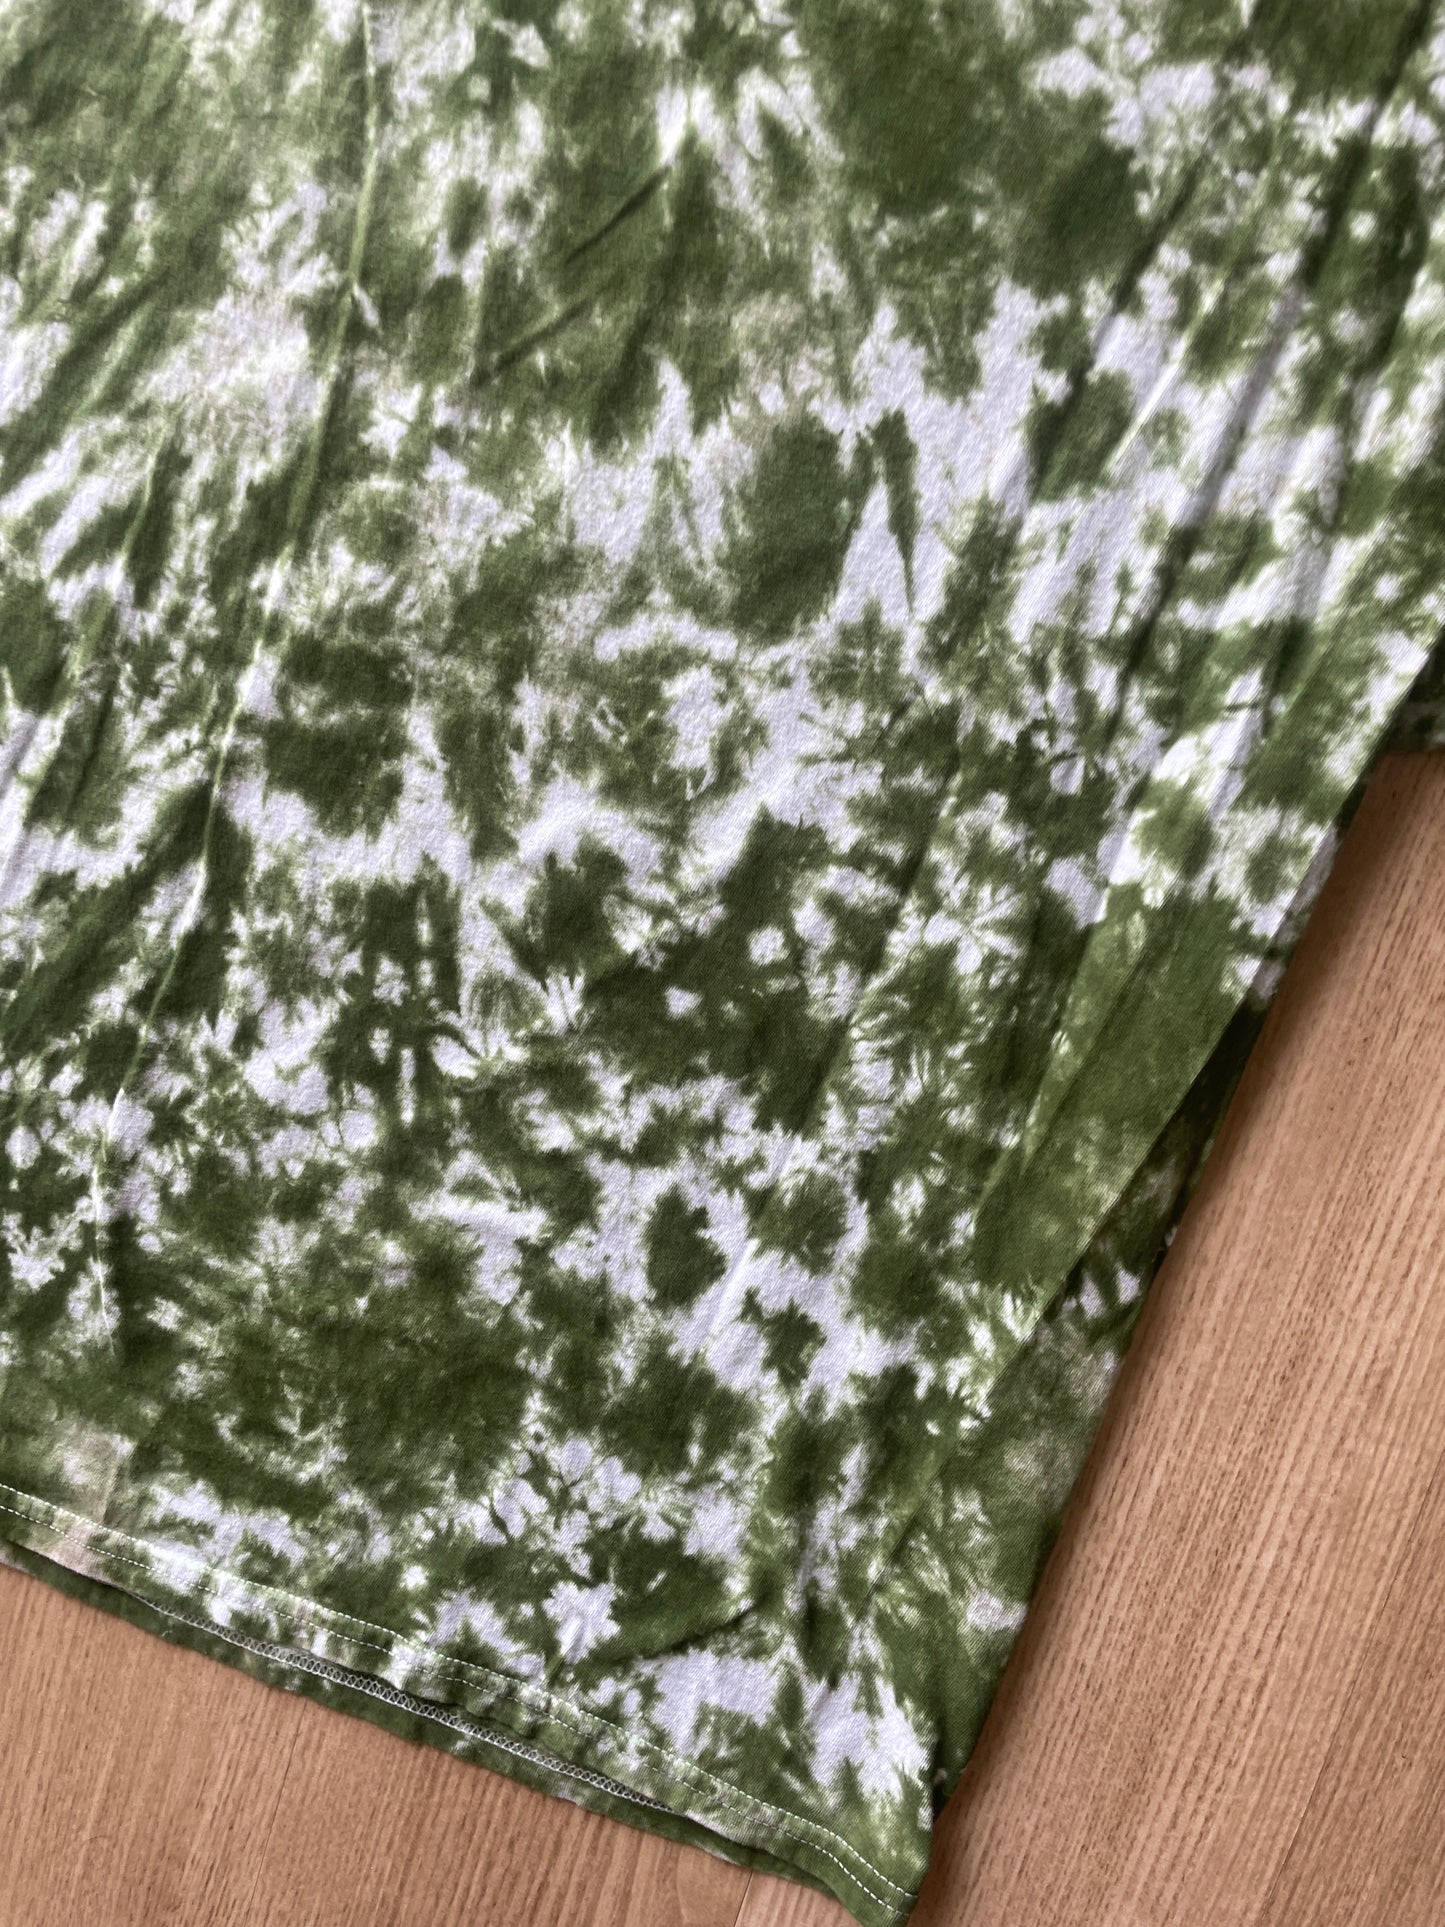 XL Men’s Saguaro Cactus Tie Dye T-Shirt | One-Of-a-Kind White and Green Crumpled Short Sleeve